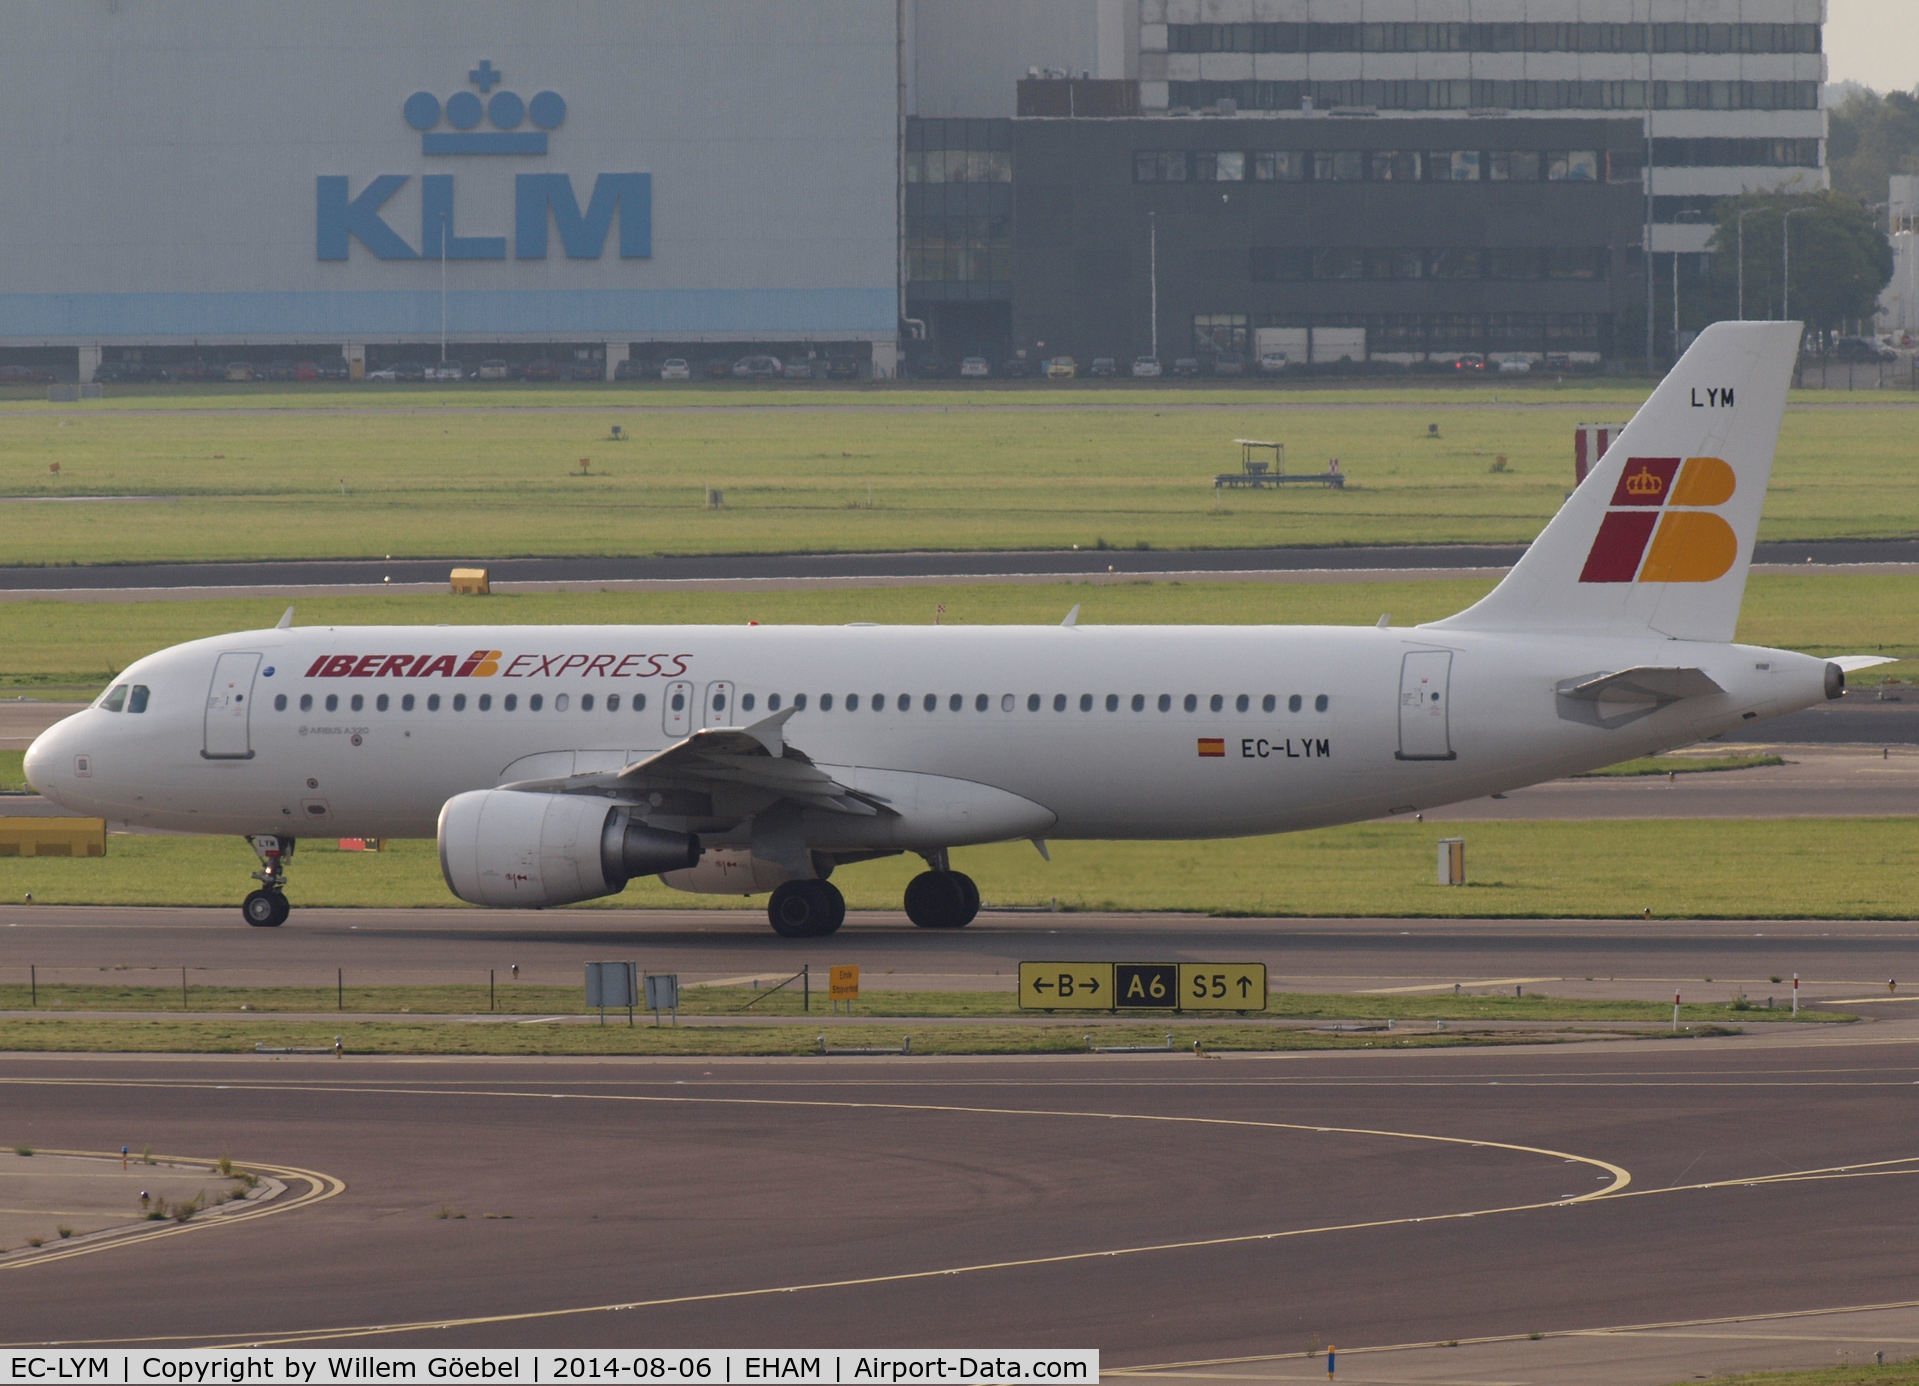 EC-LYM, 2013 Airbus A320-216 C/N 5815, Taxi to the runway of Schiphol Airport